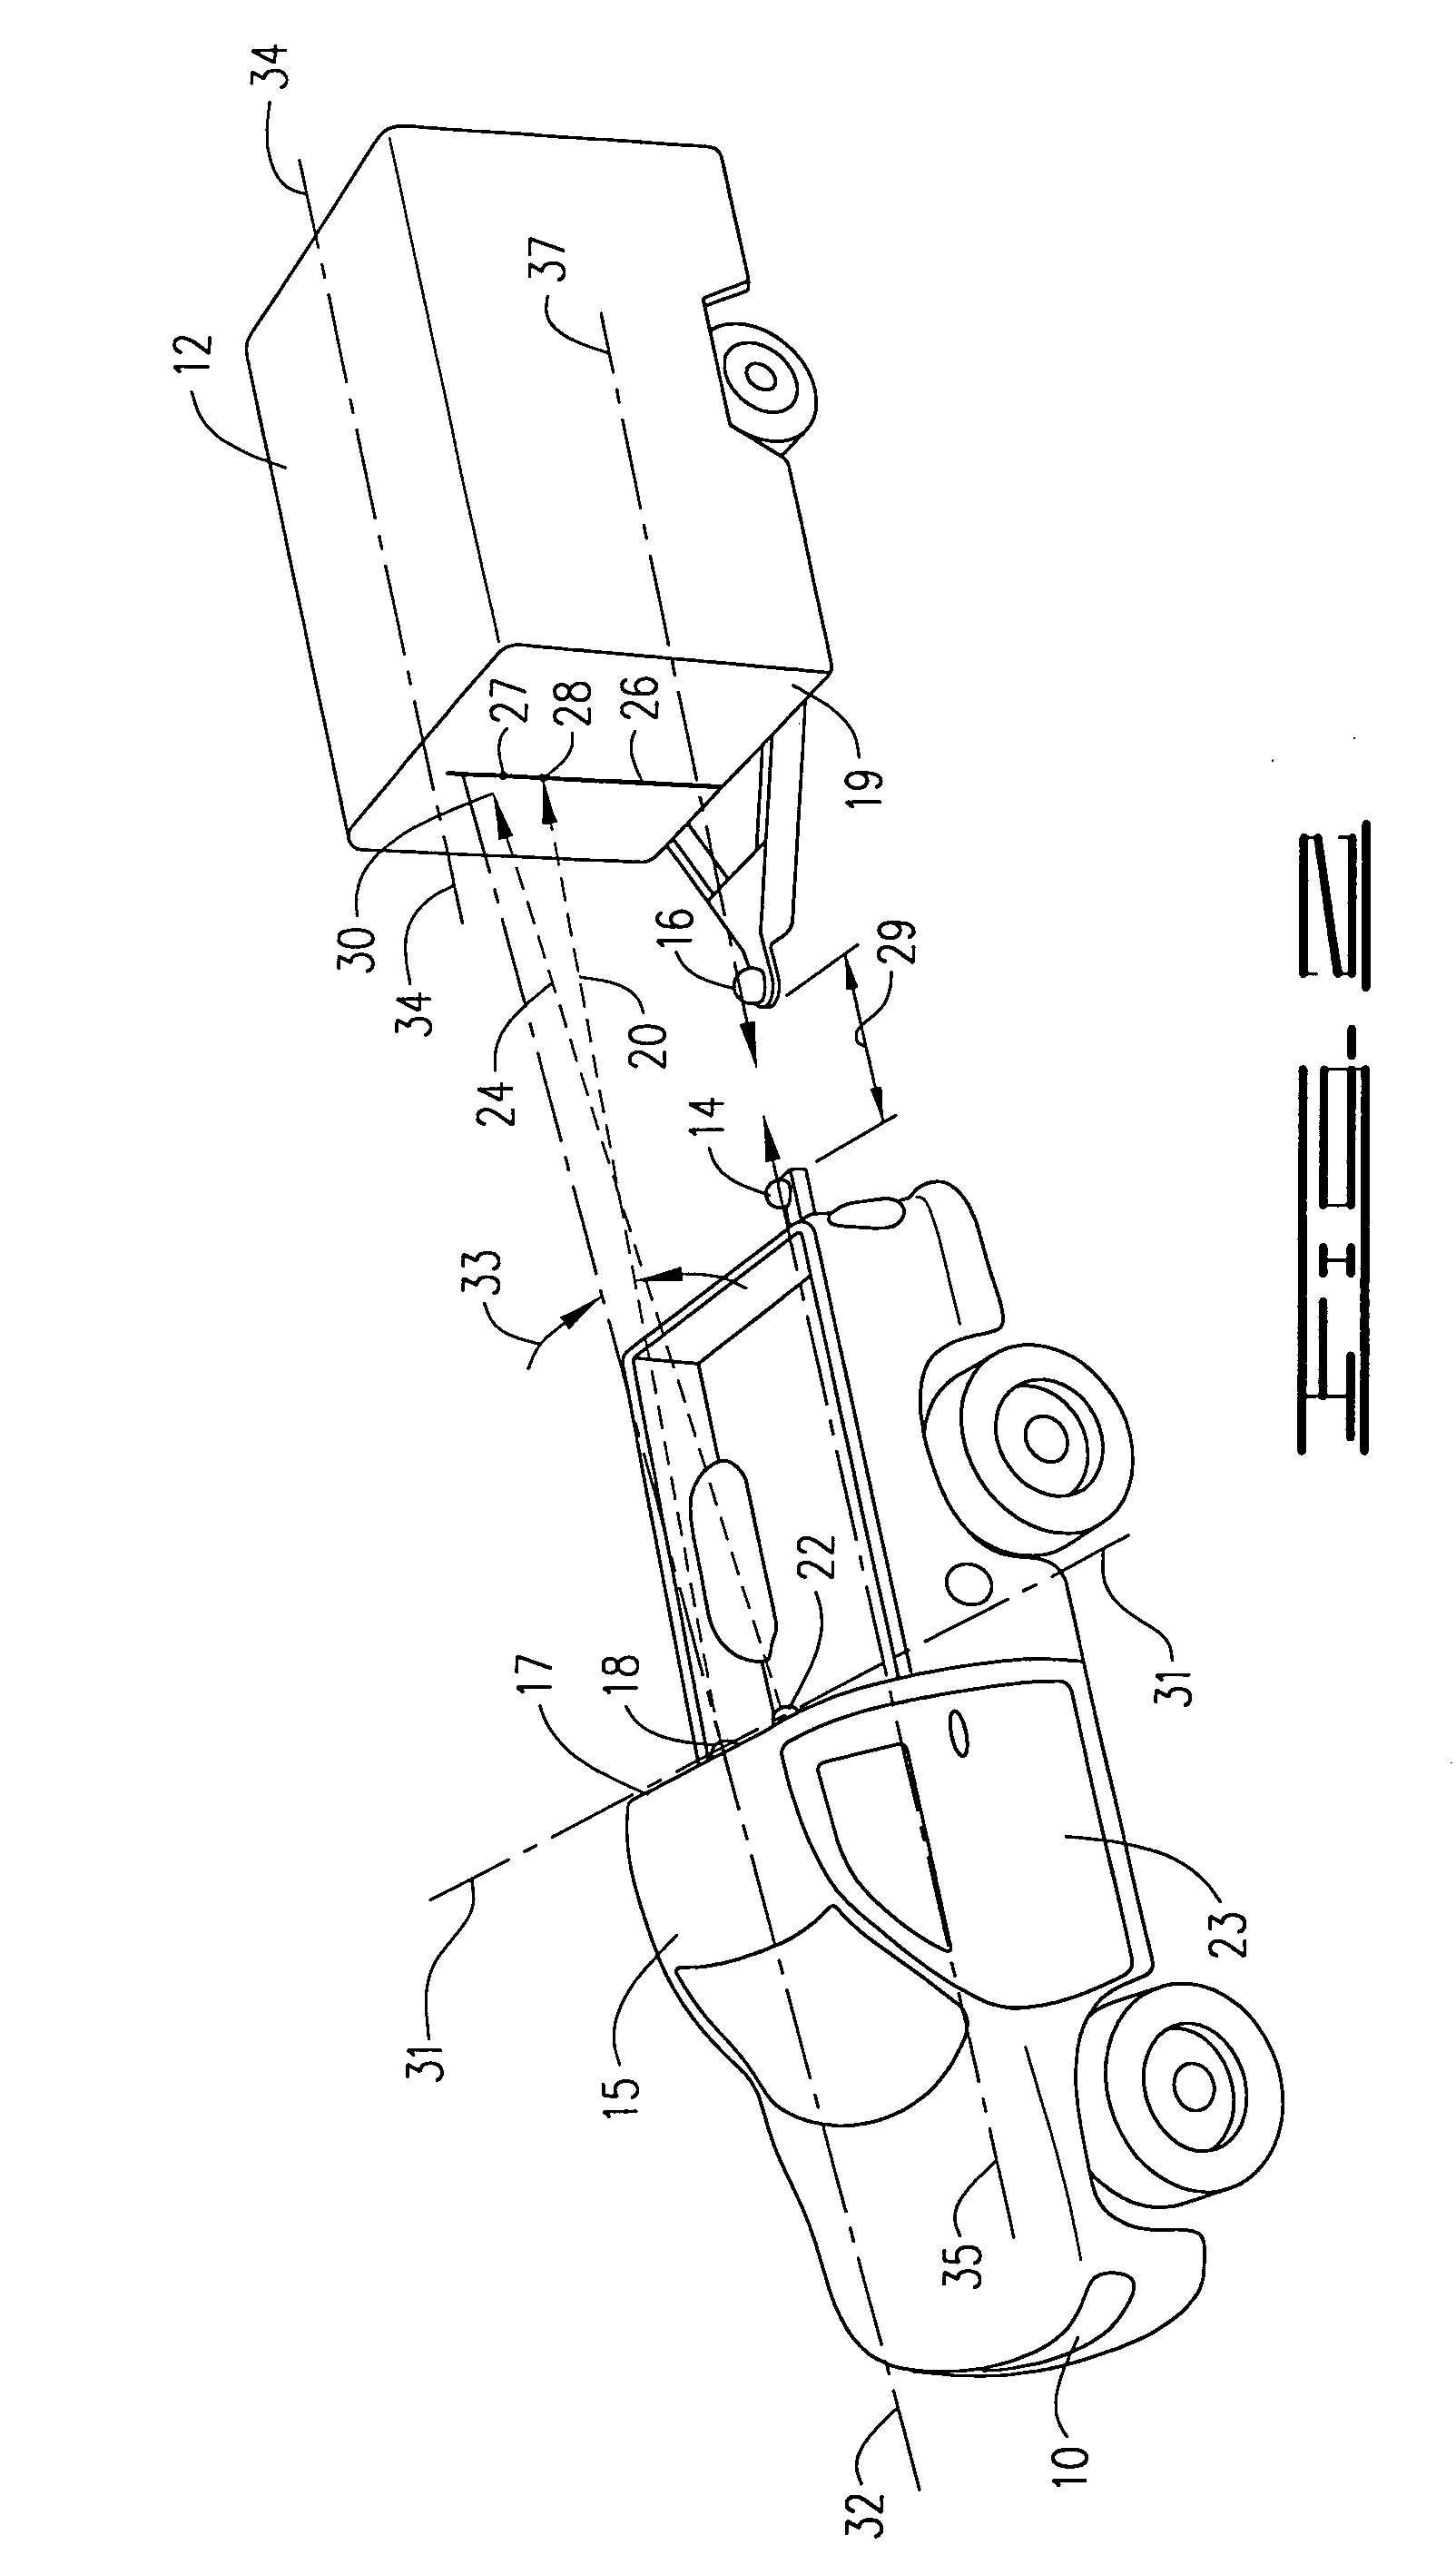 Object alignment device and method